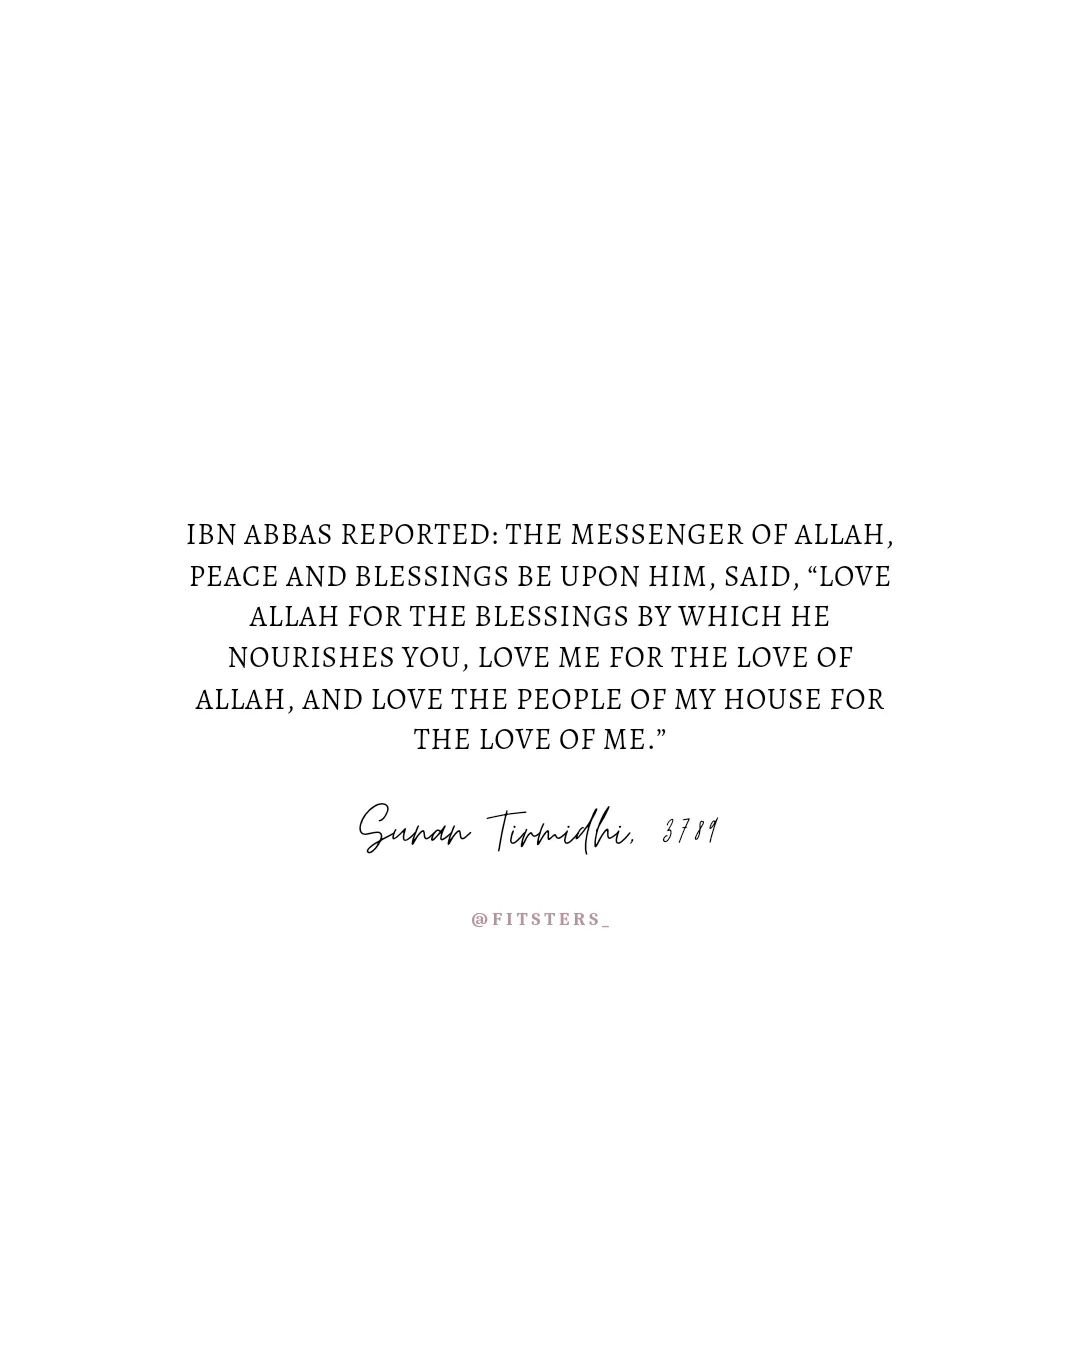 Ibn Abbas reported: The Messenger of Allah, peace and blessings be upon him, said, &ldquo;Love Allah for the blessings by which He nourishes you, love me for the love of Allah, and love the people of my house for the love of me.&rdquo;
Sunan Tirmidhi